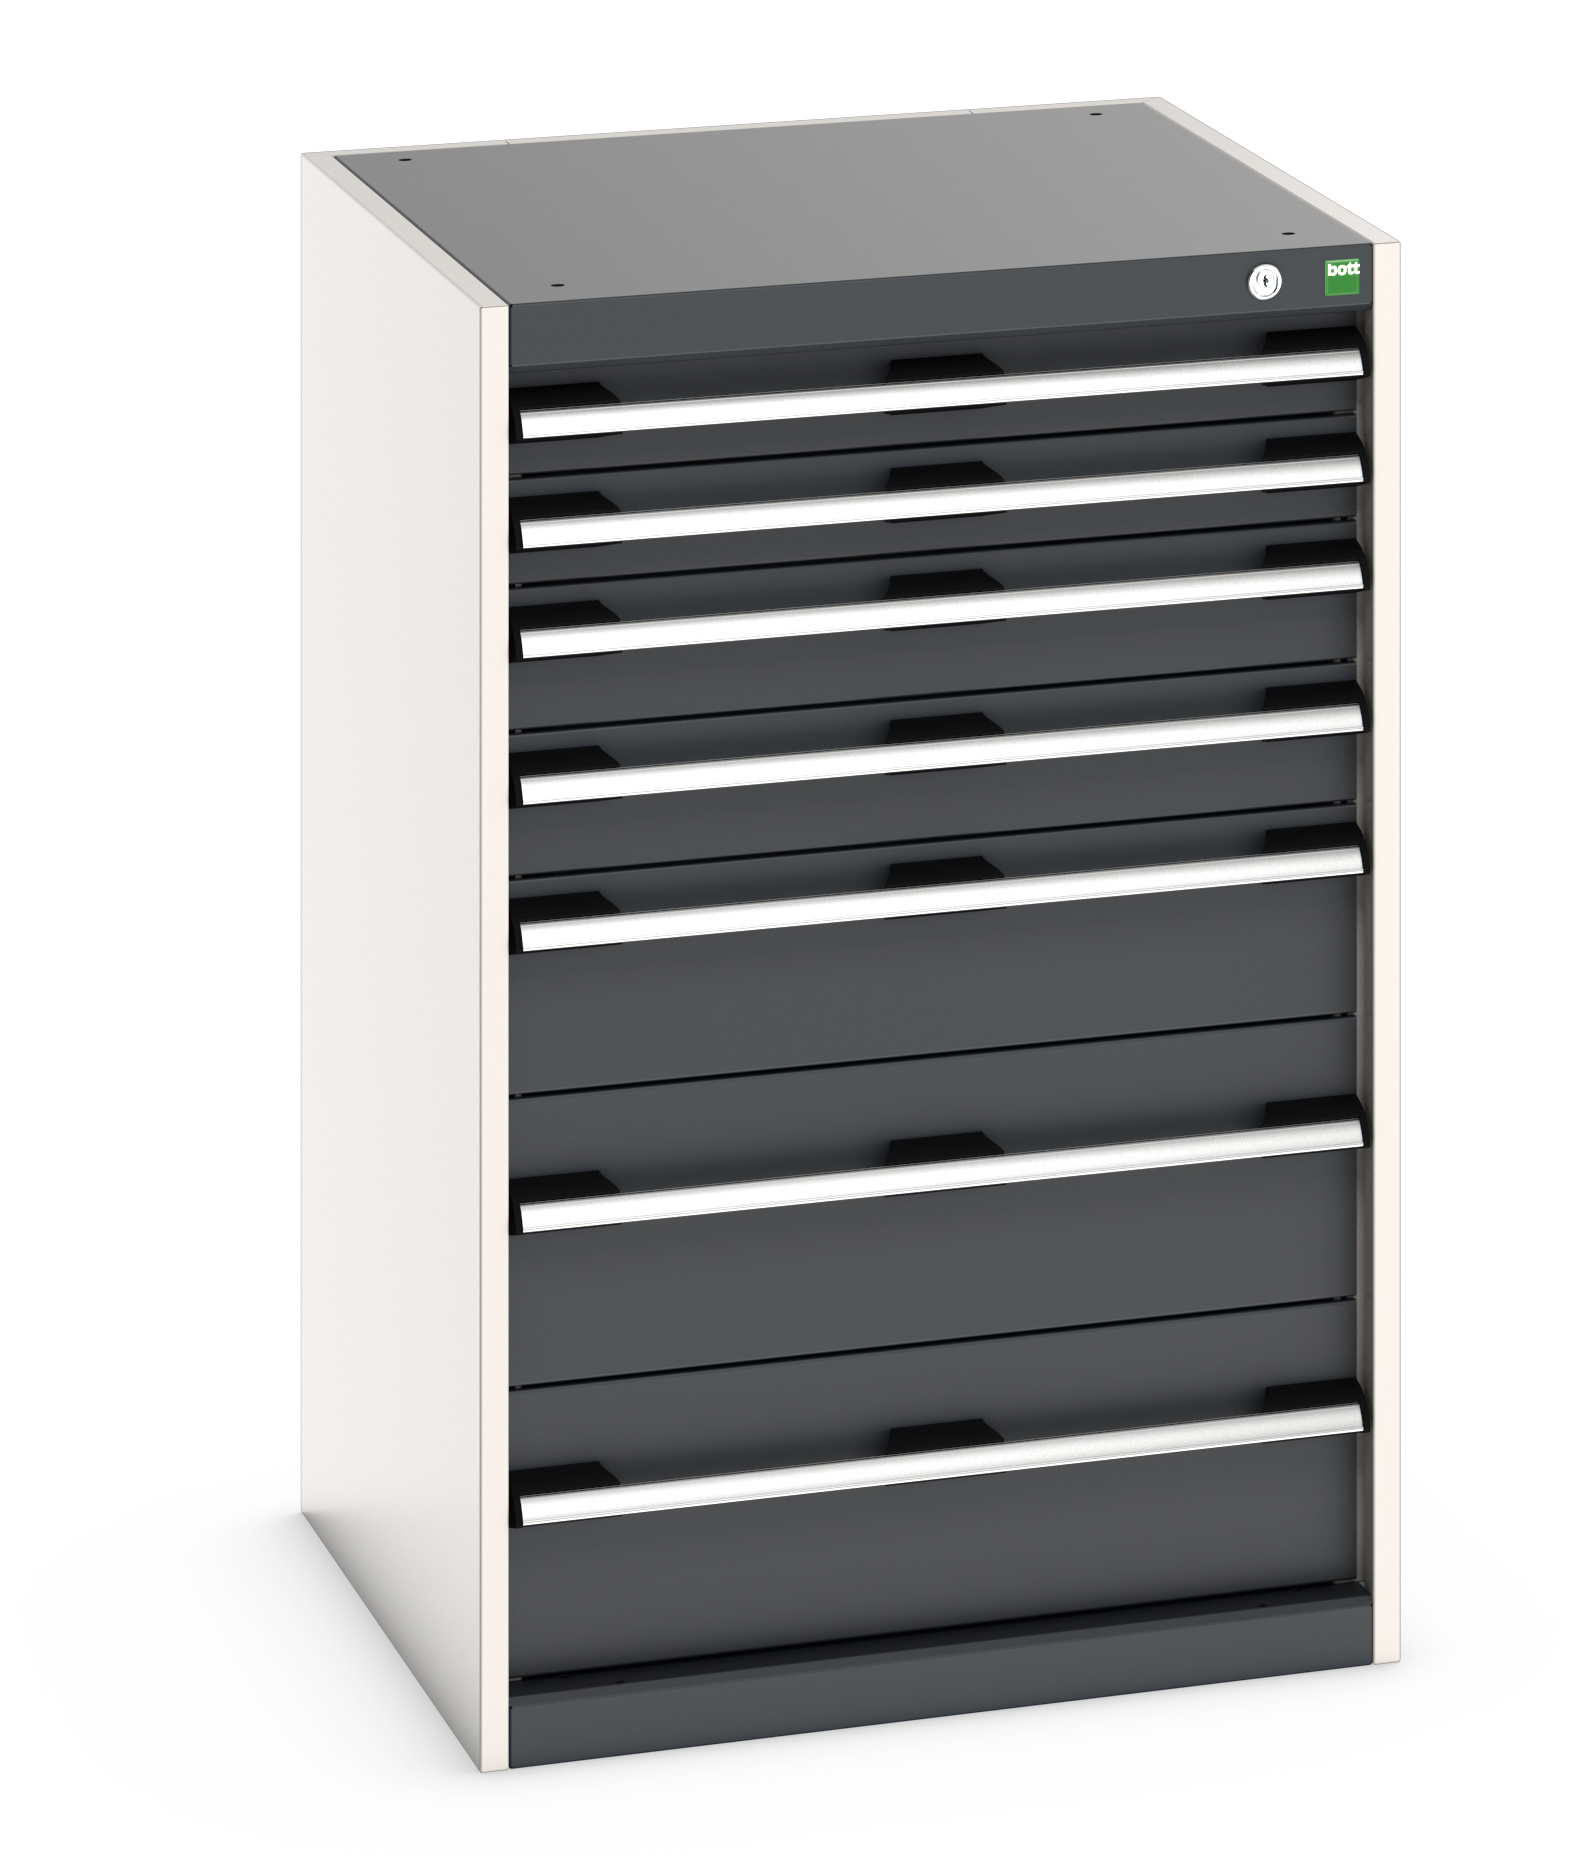 Bott Cubio Drawer Cabinet With 7 Drawers - 40019063.19V